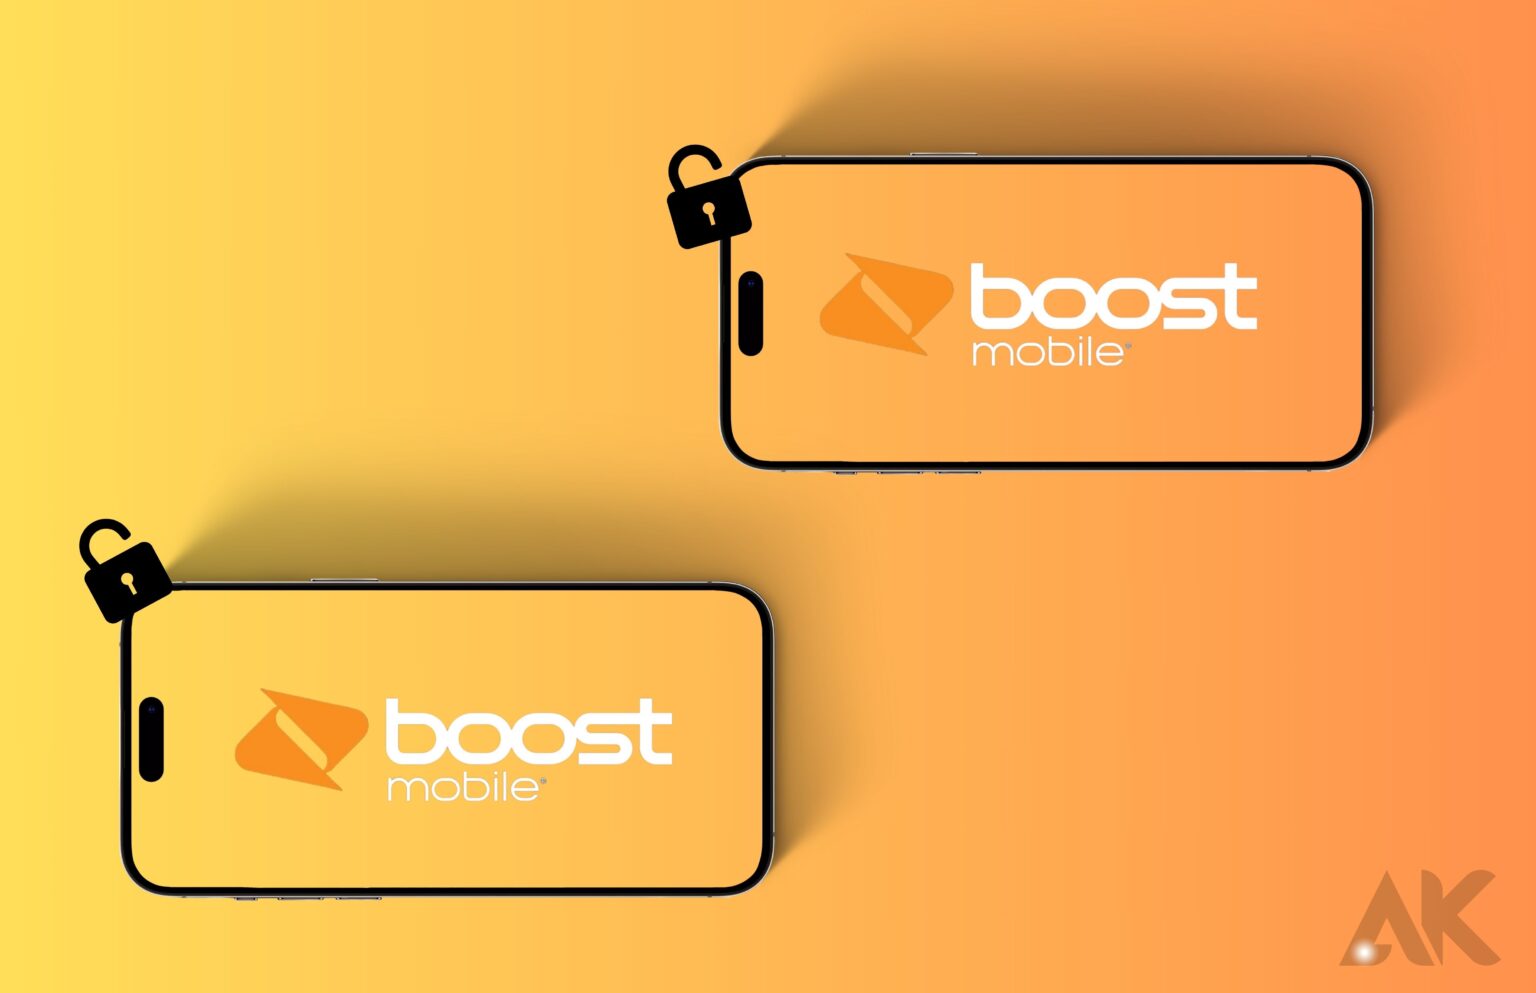 How to unlock dish boost mobile free